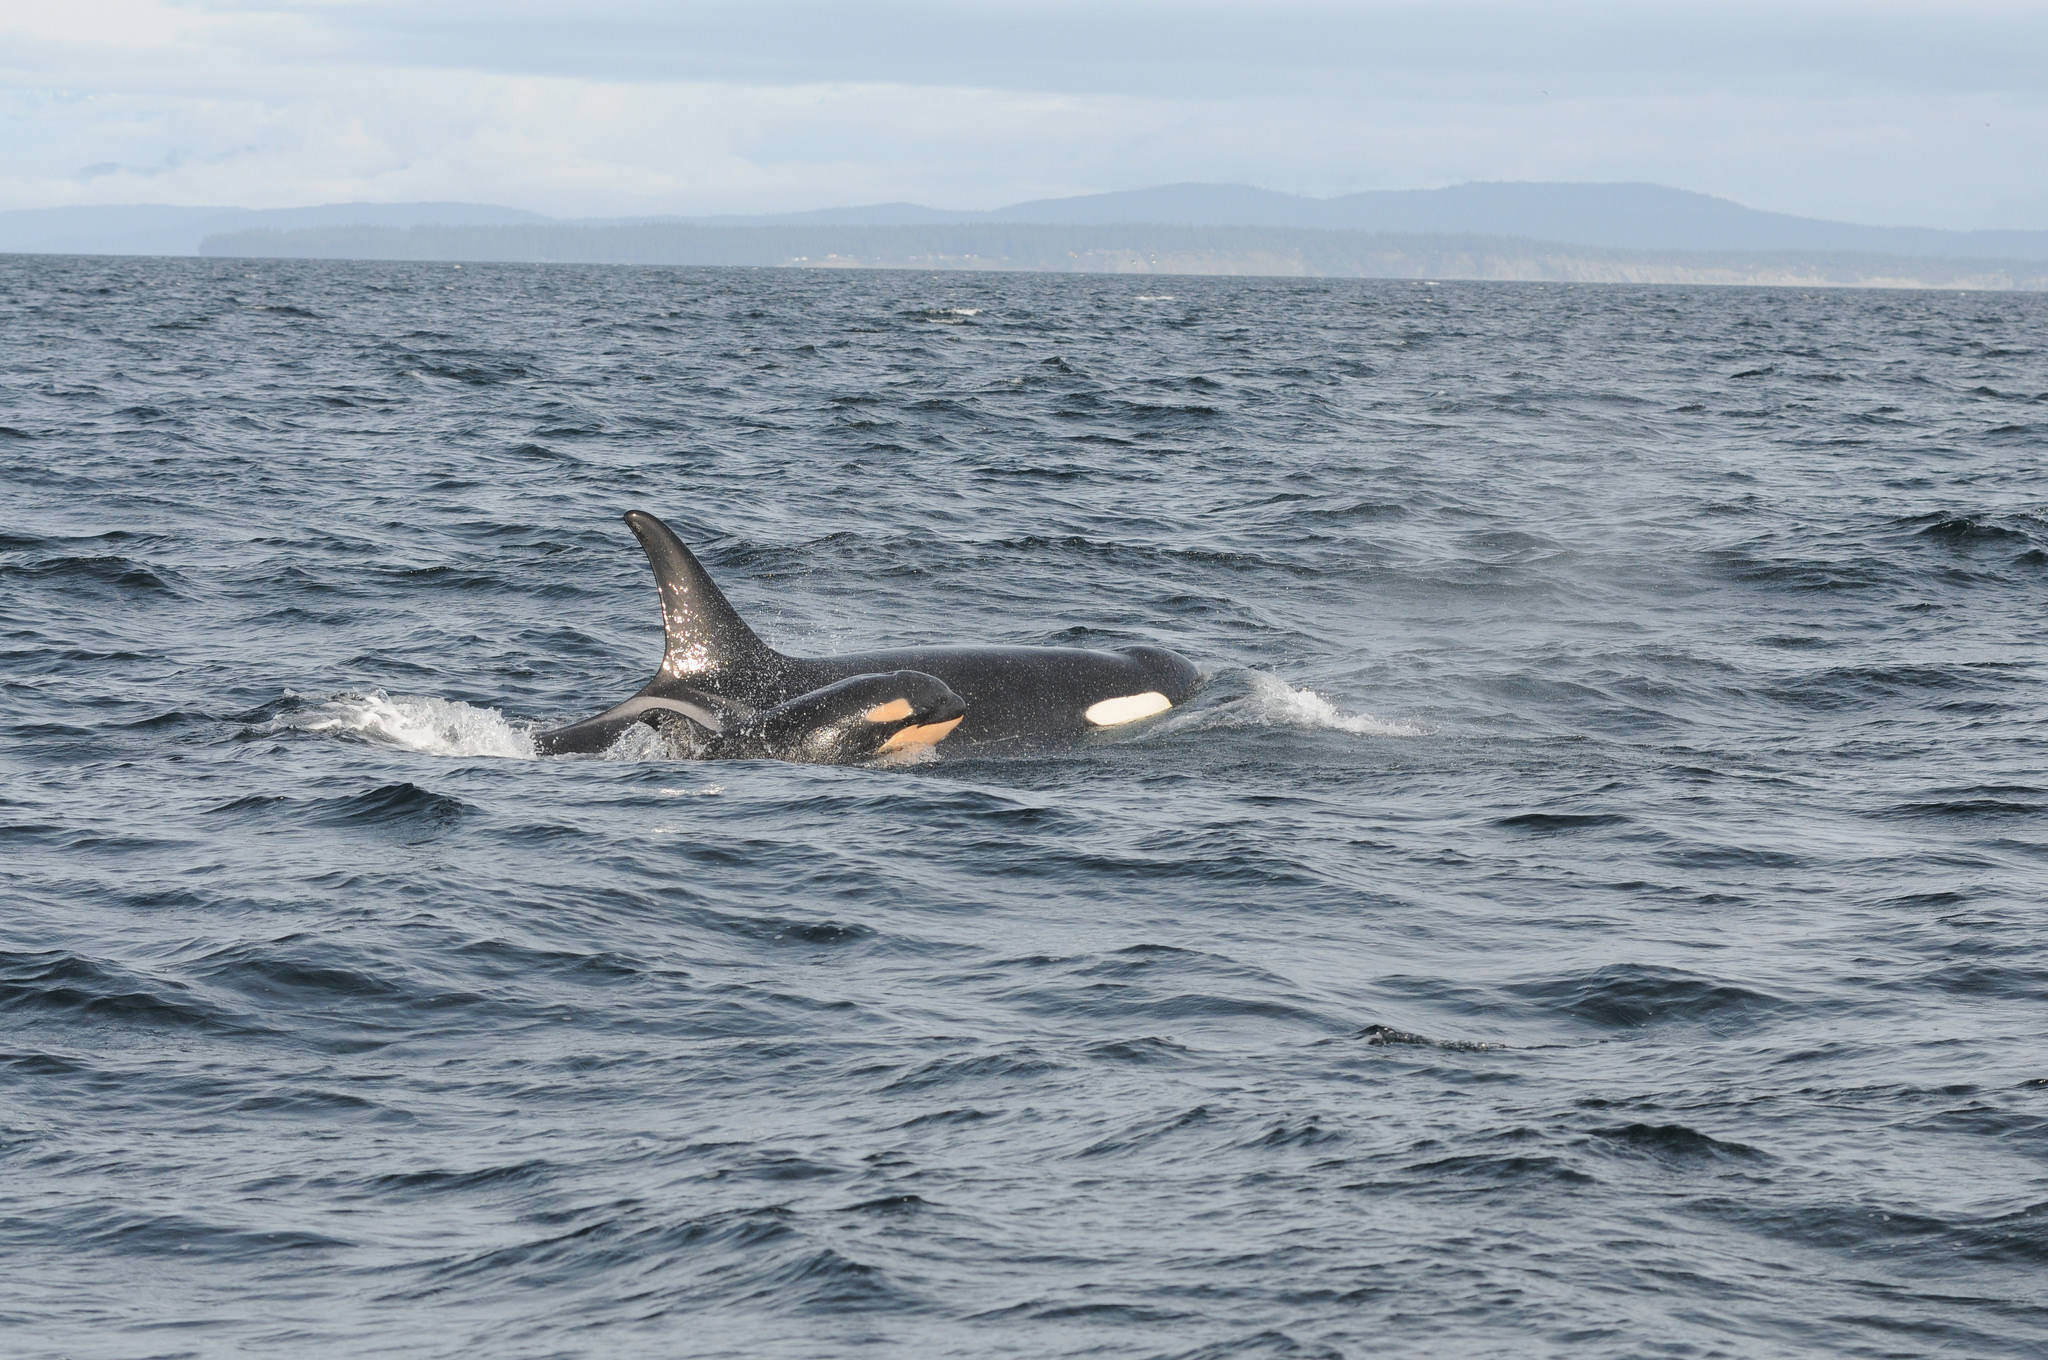 NOAA looks at ways to save J pod orca, who is near death